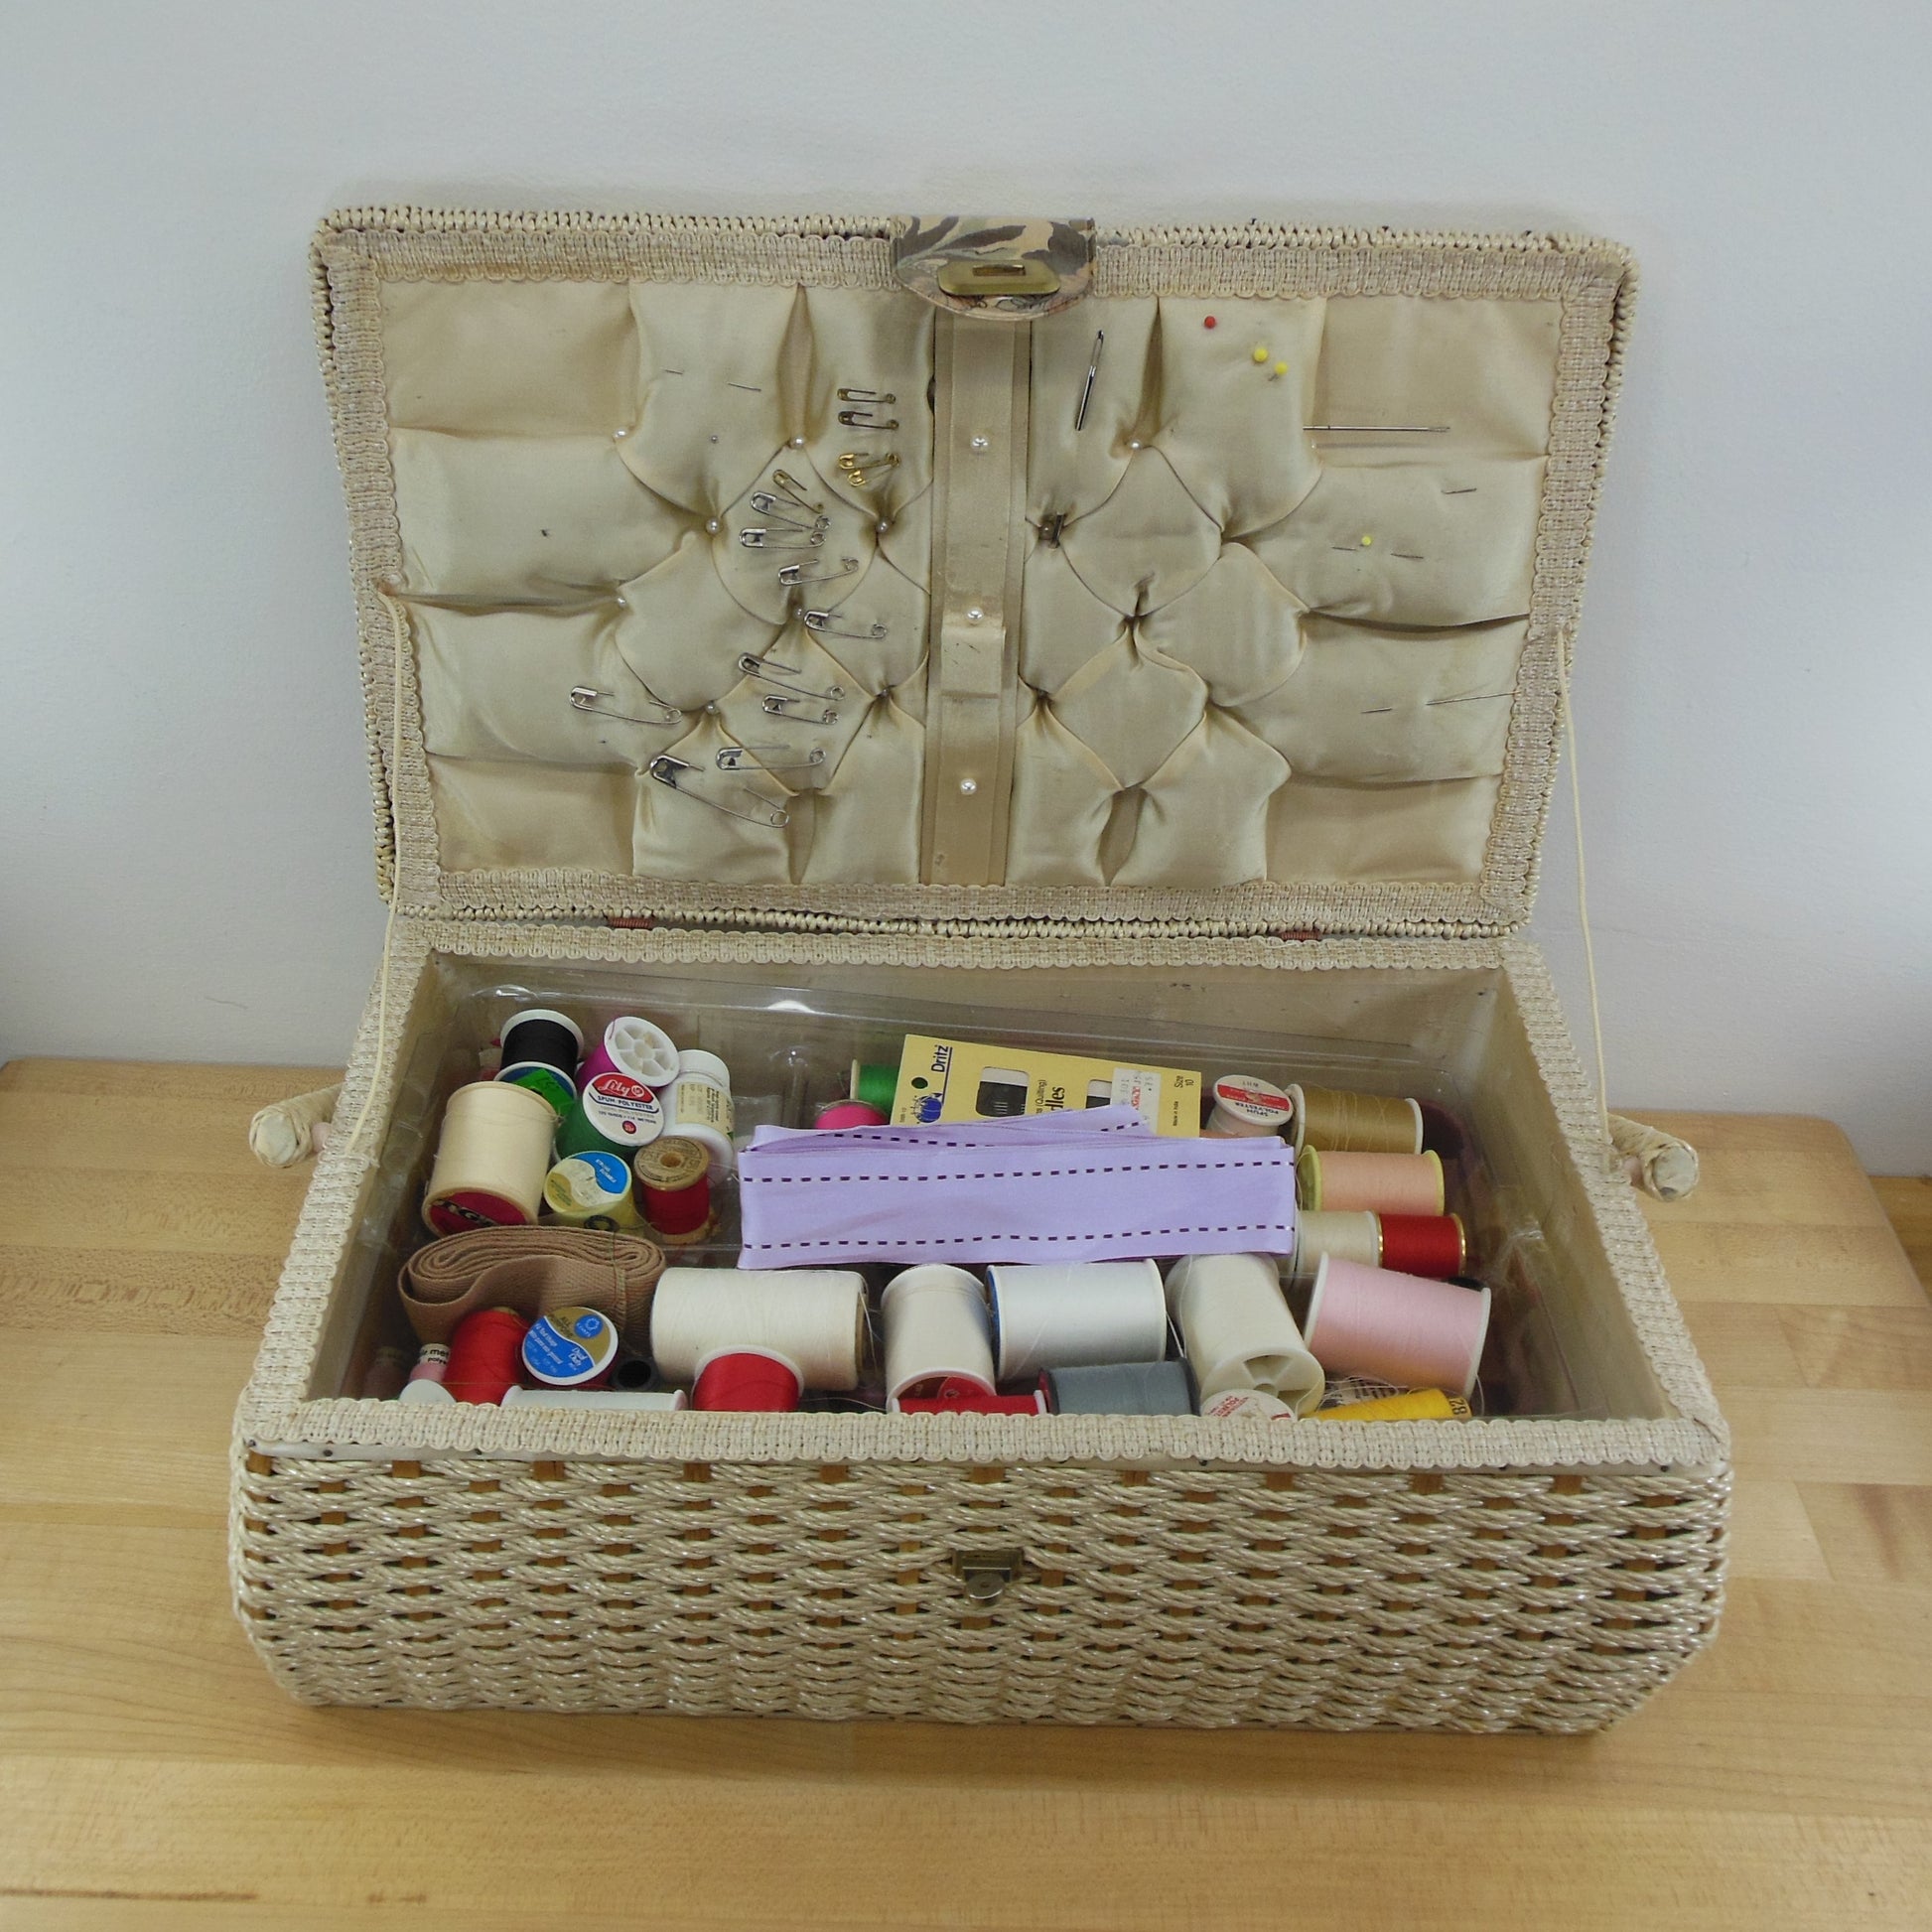 Estate Wicker Woven Sewing Box Basket with Notions Thread Needles Vintage